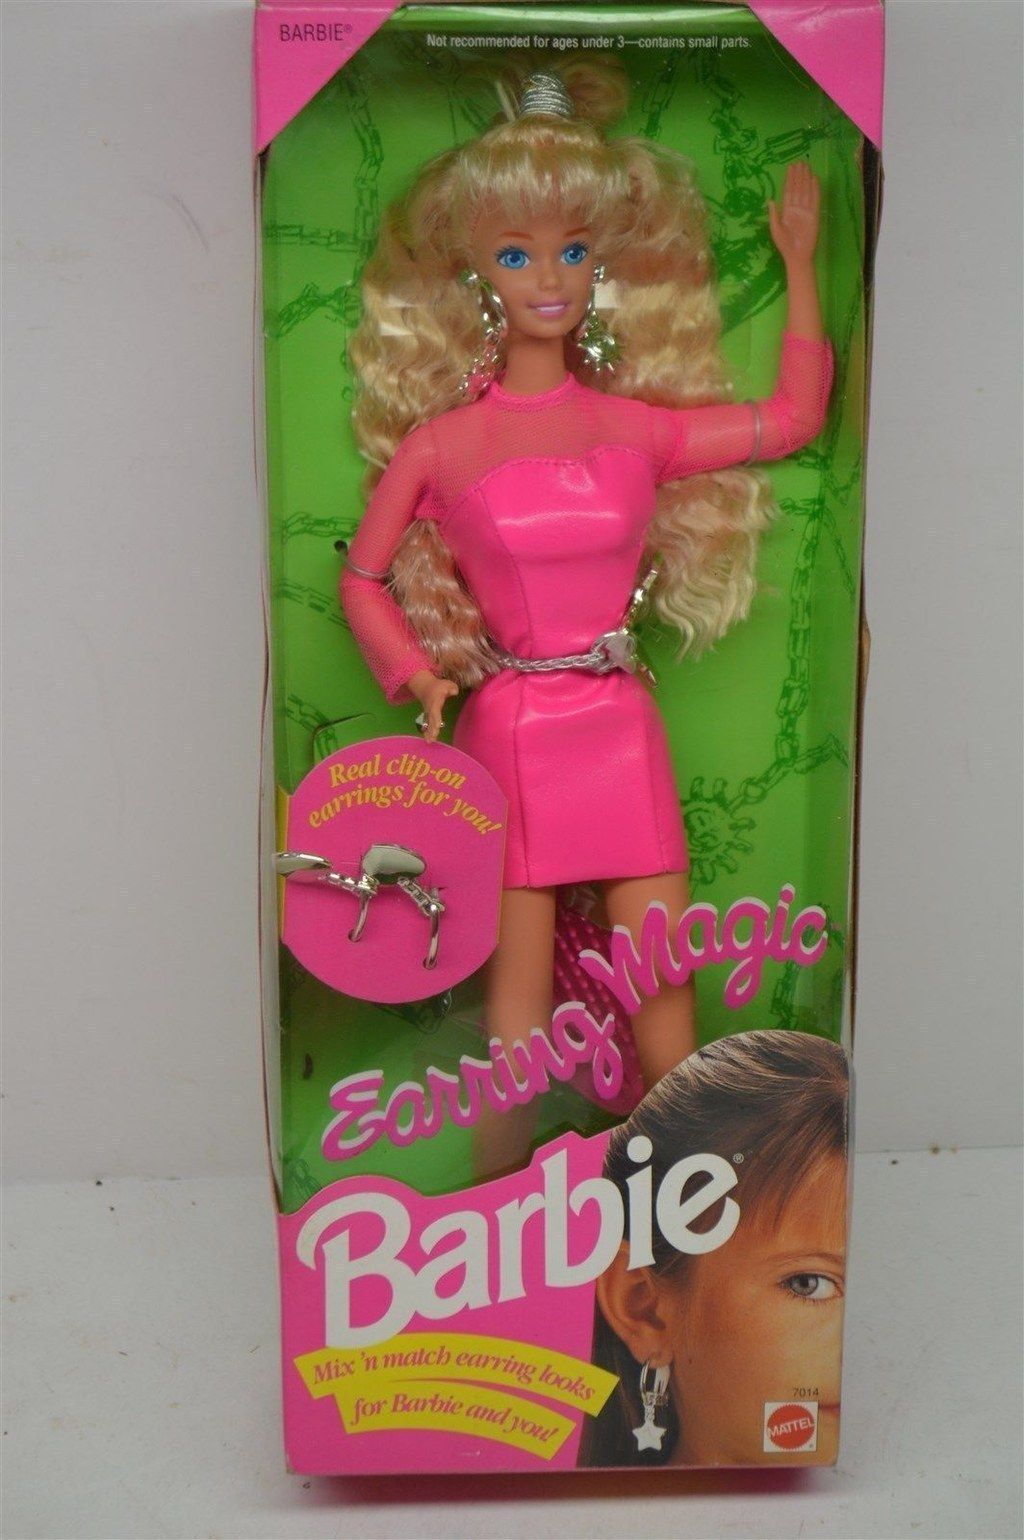 …and Earring Magic Barbie taught you how to accessorize like